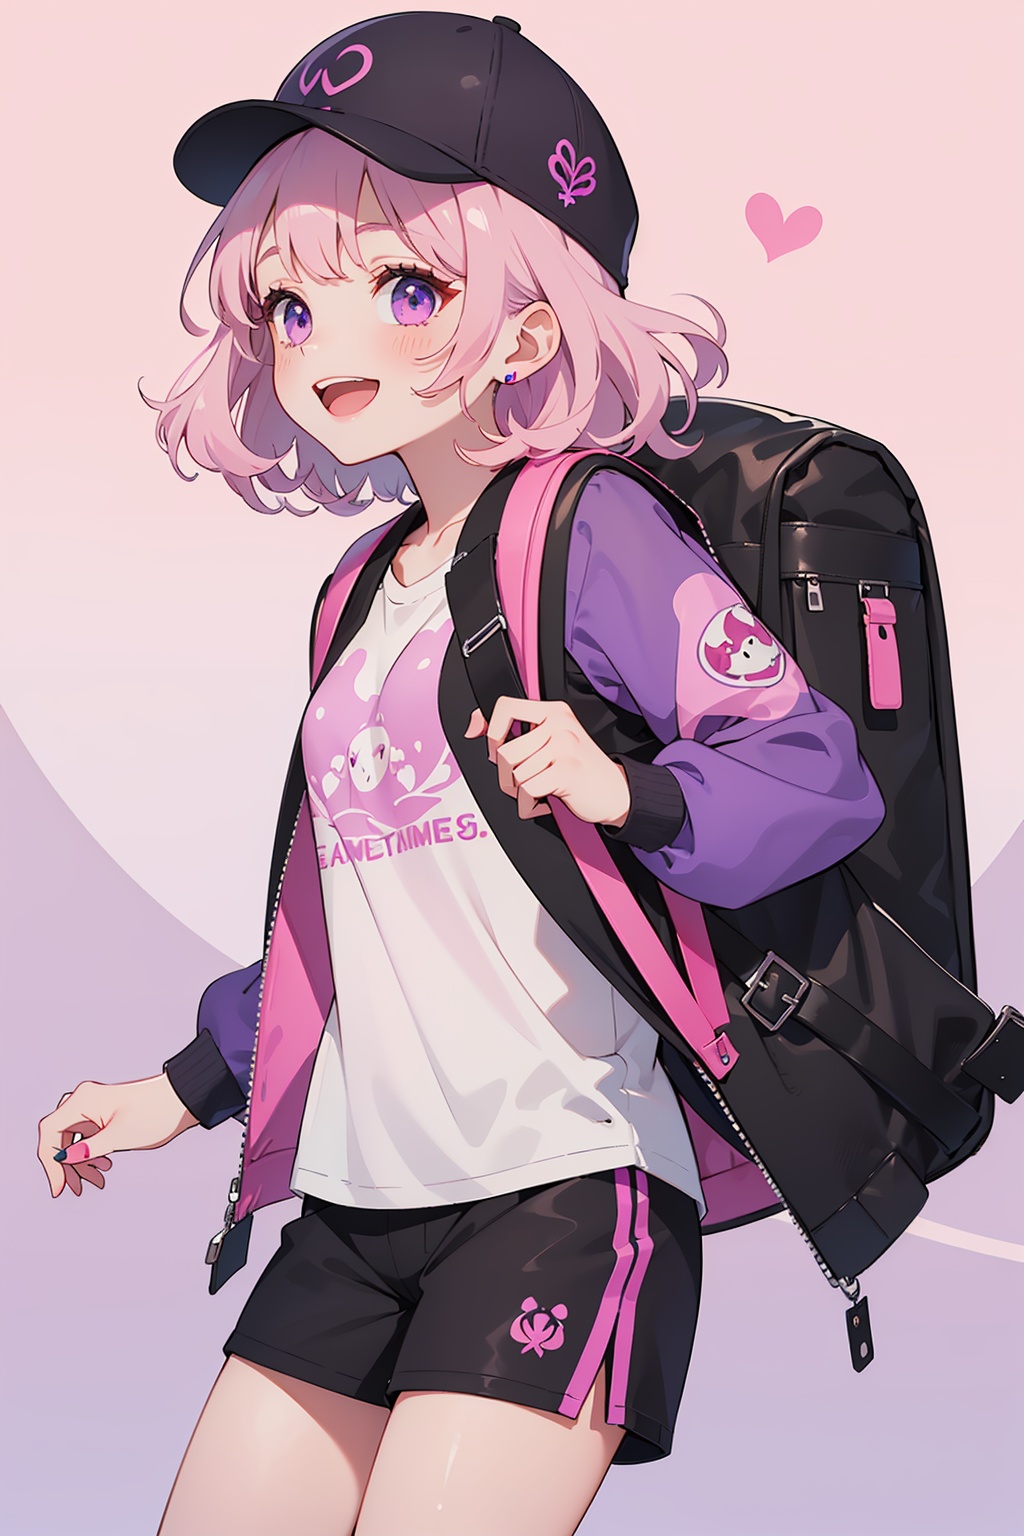 ( 1girl is happy and laughing) ((Pure purple and pink background:1.2)),A girl ready for a day of gaming,her dark curly hair adorned with a cap,carries a loaded backpack. Her black jacket and shorts combination is complemented by gaming motifs,suggesting a dedicated gamer lifestyle.,